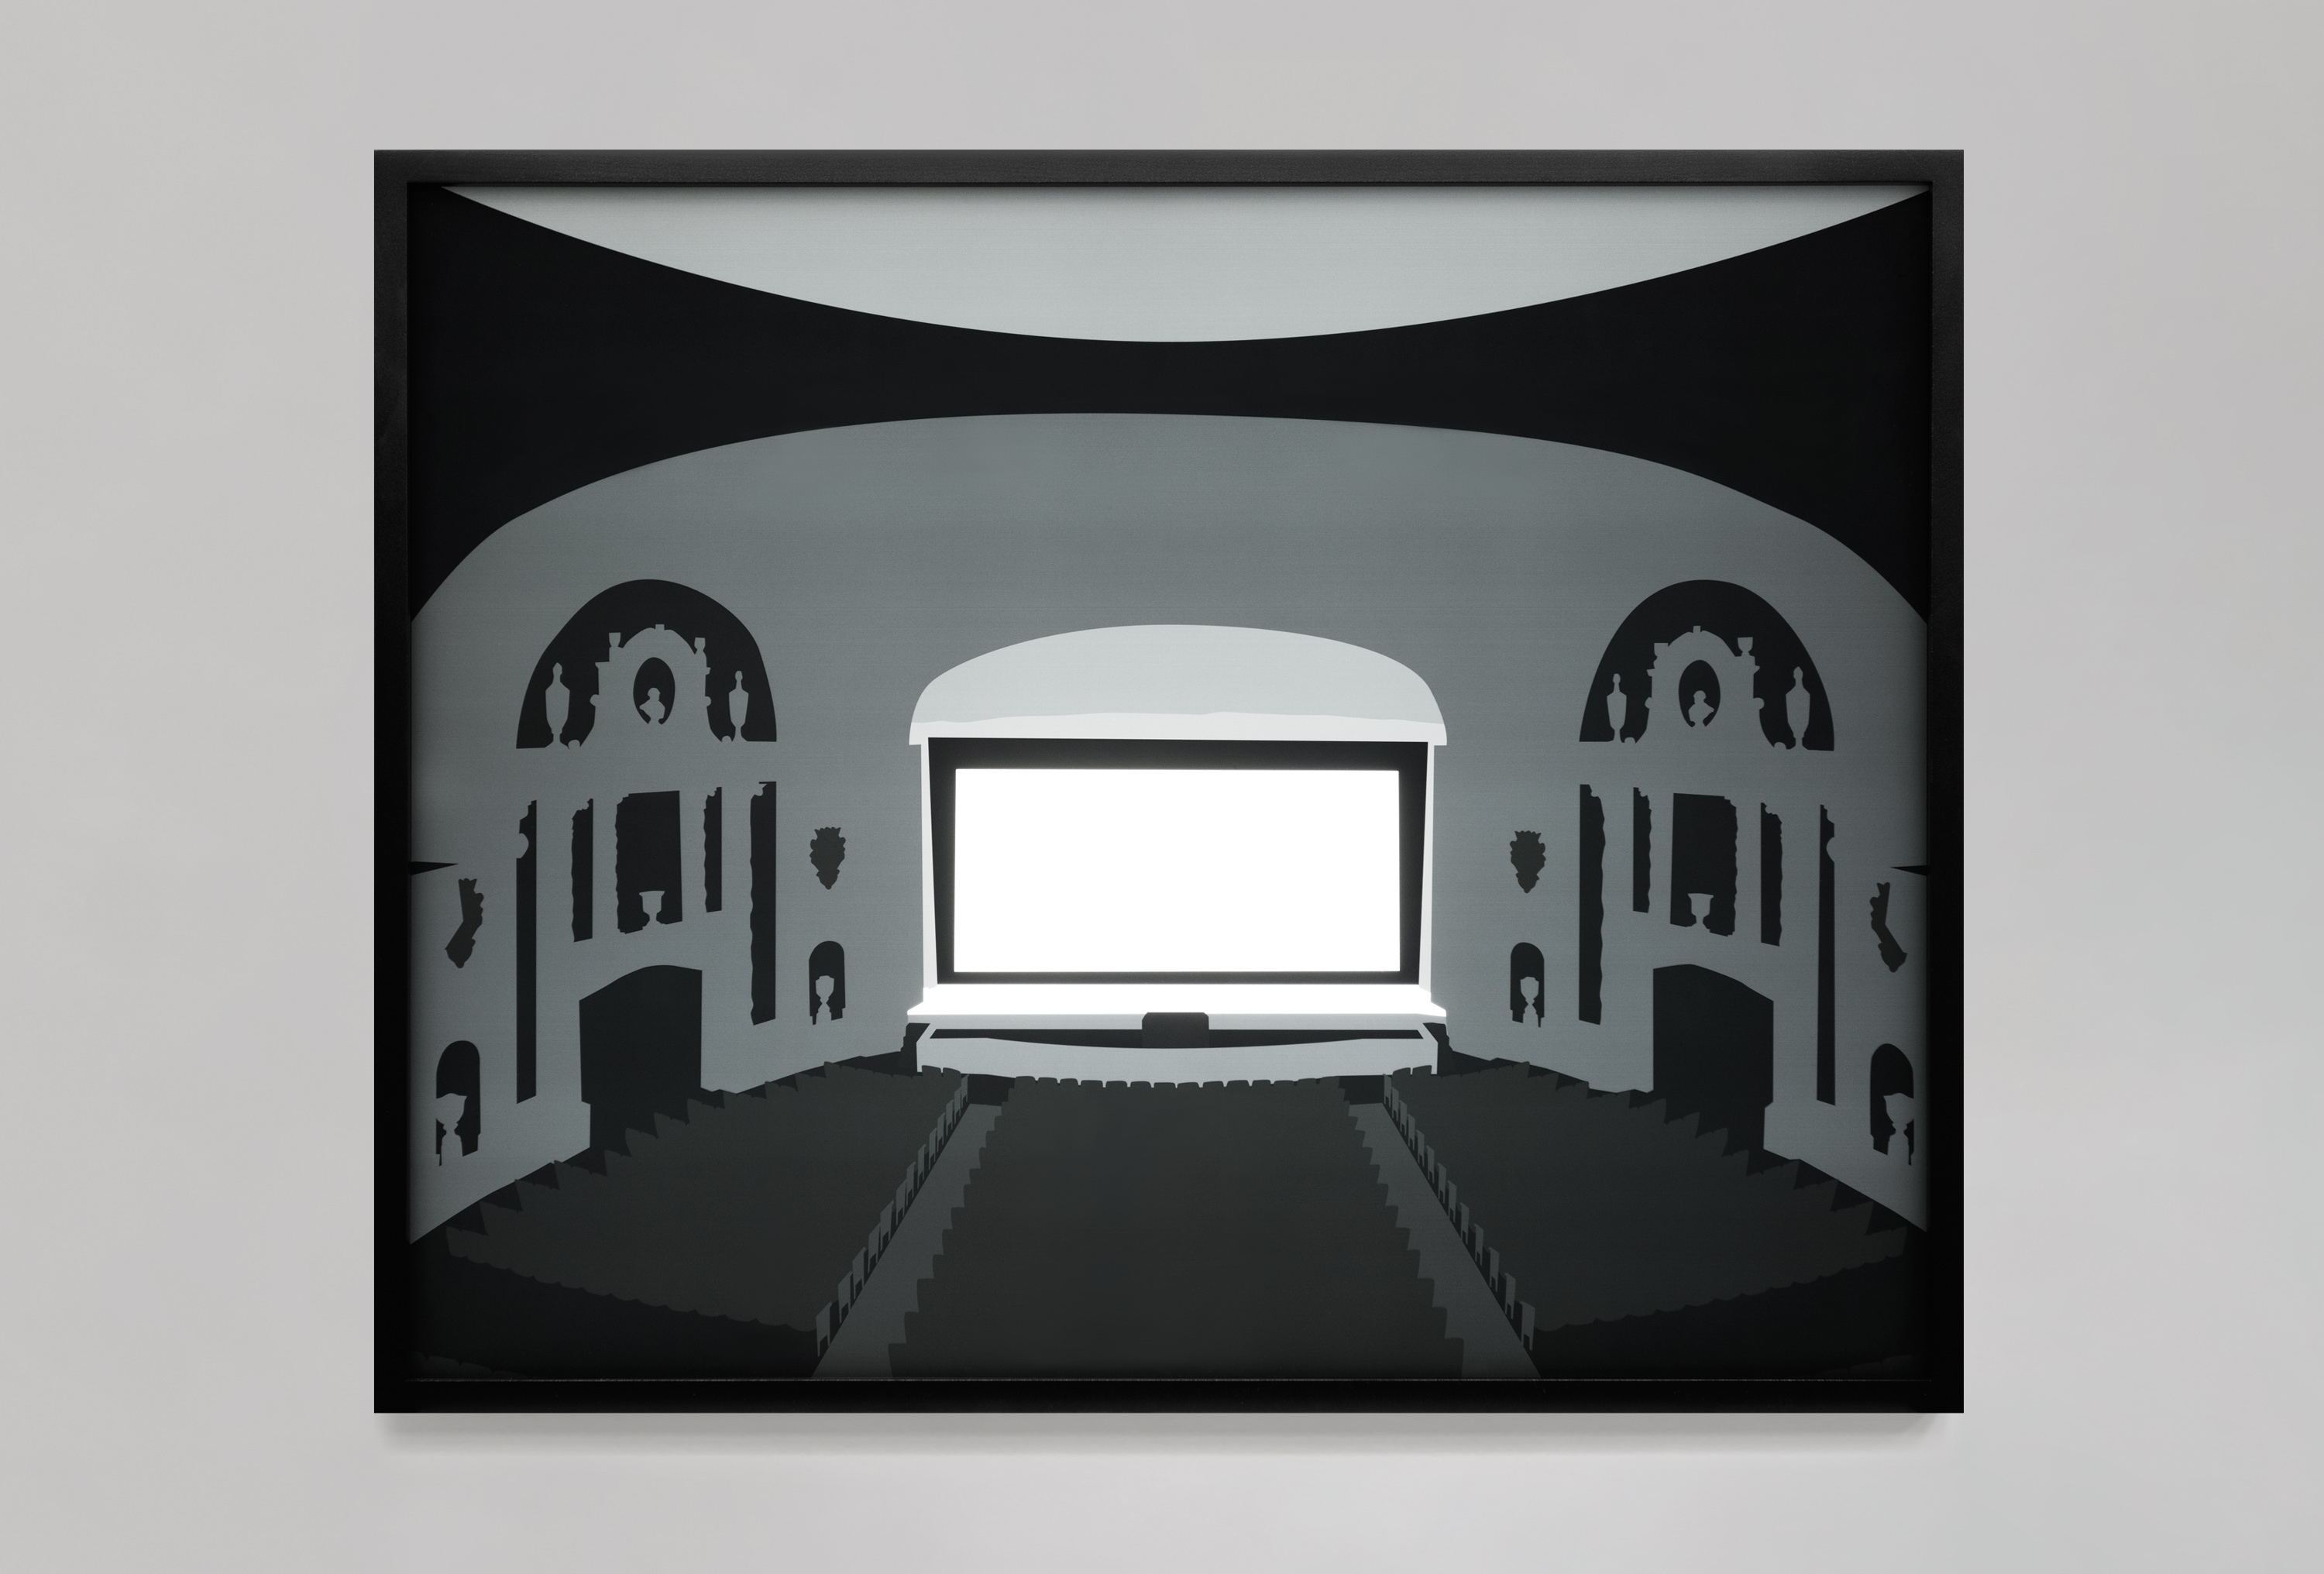 Color image of a black and white transparency on a light box depicting the inside of an empty theatre